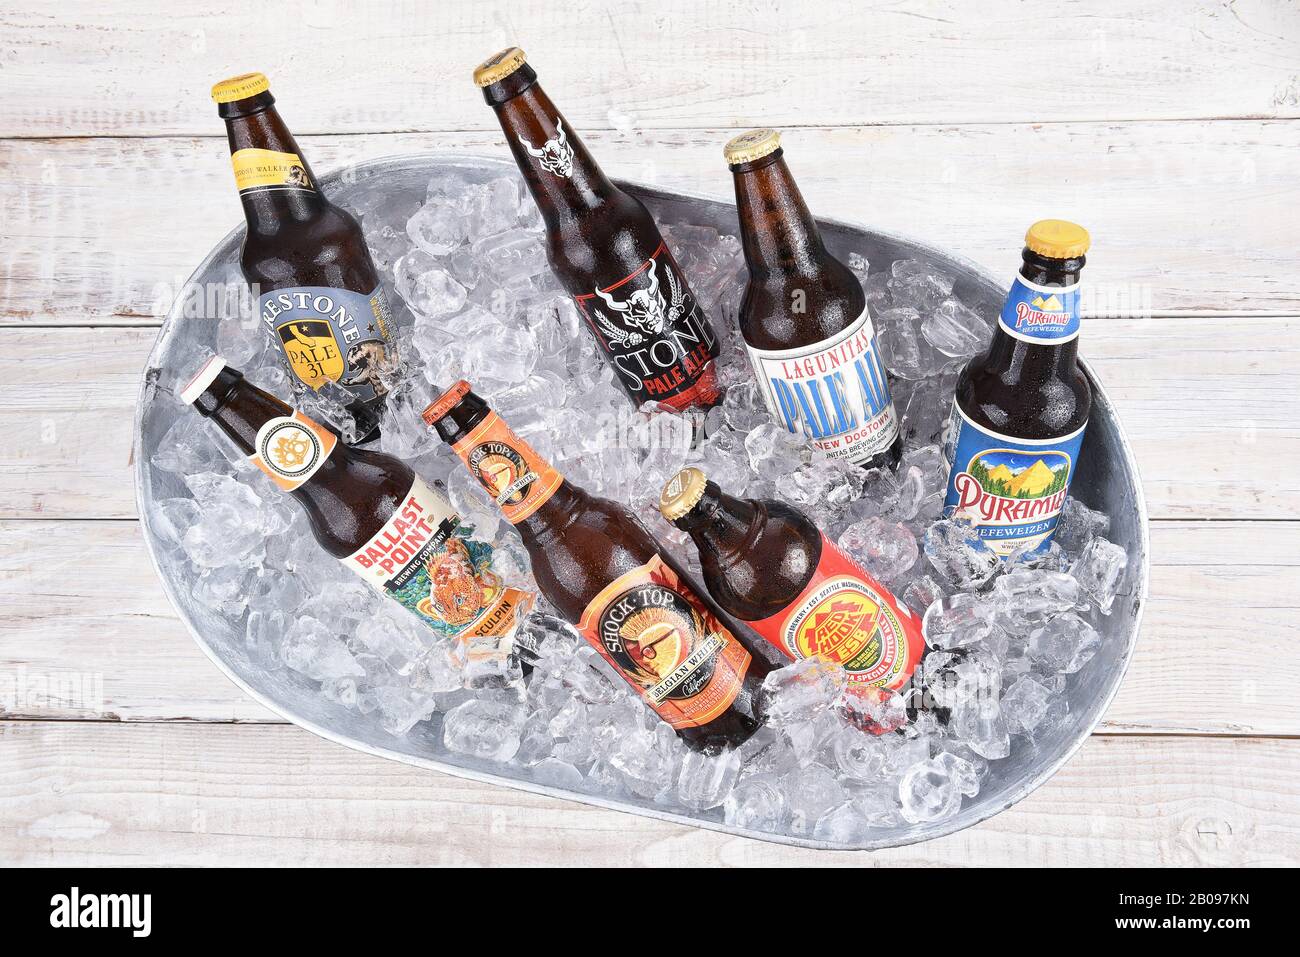 IRVINE, CALIFORNIA - AUGUST 31, 2016: Craft Beers in Ice Bucket. Craft beers or Microbrews are a fast growing segment of the adult beverage market. Stock Photo